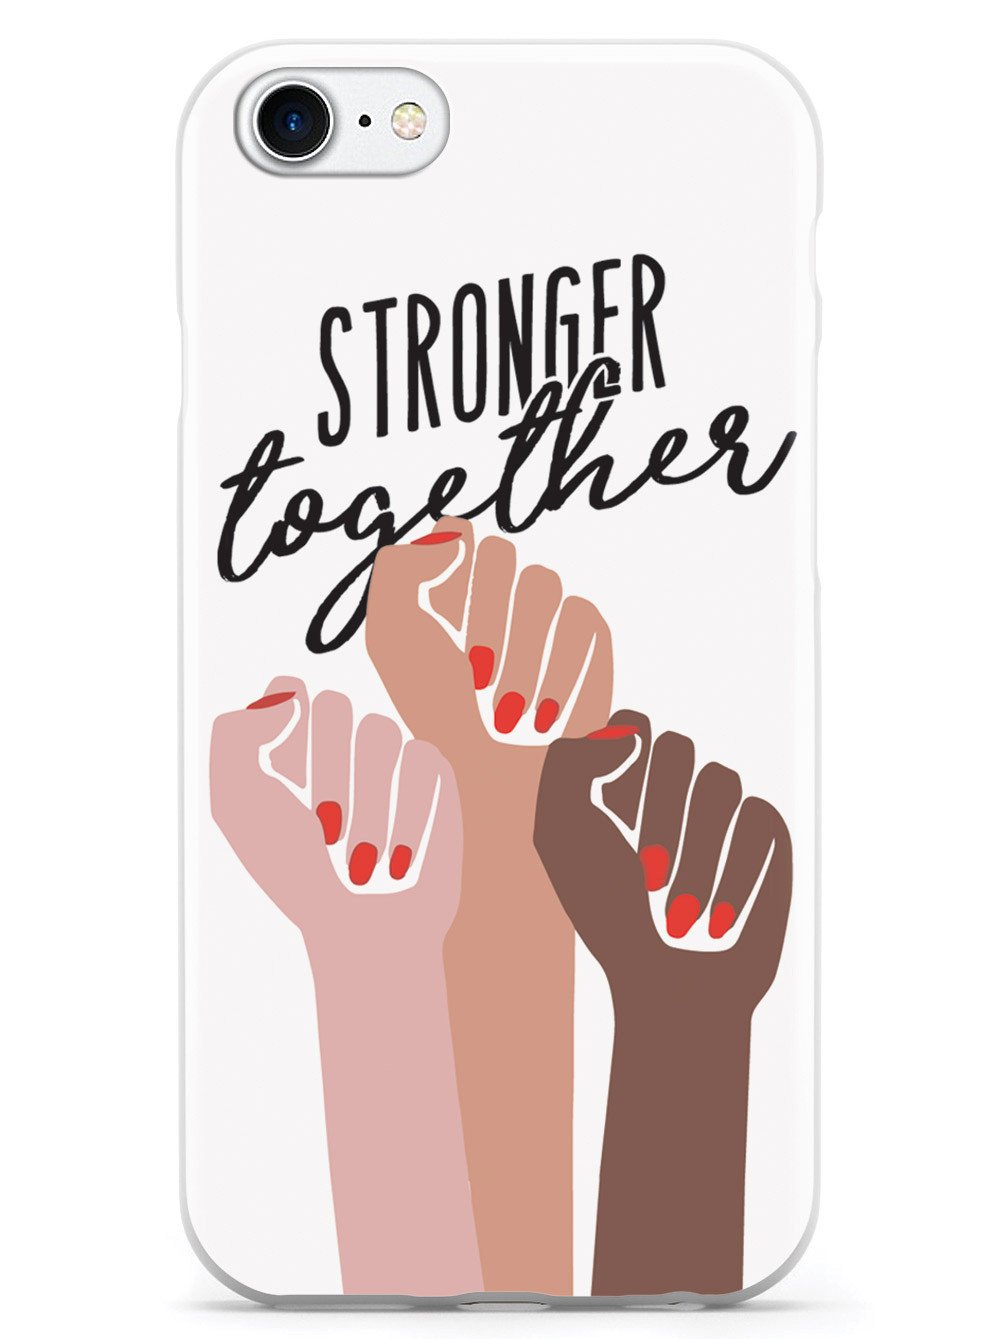 Stronger Together - Women's March Solidarity - White Case - pipercleo.com